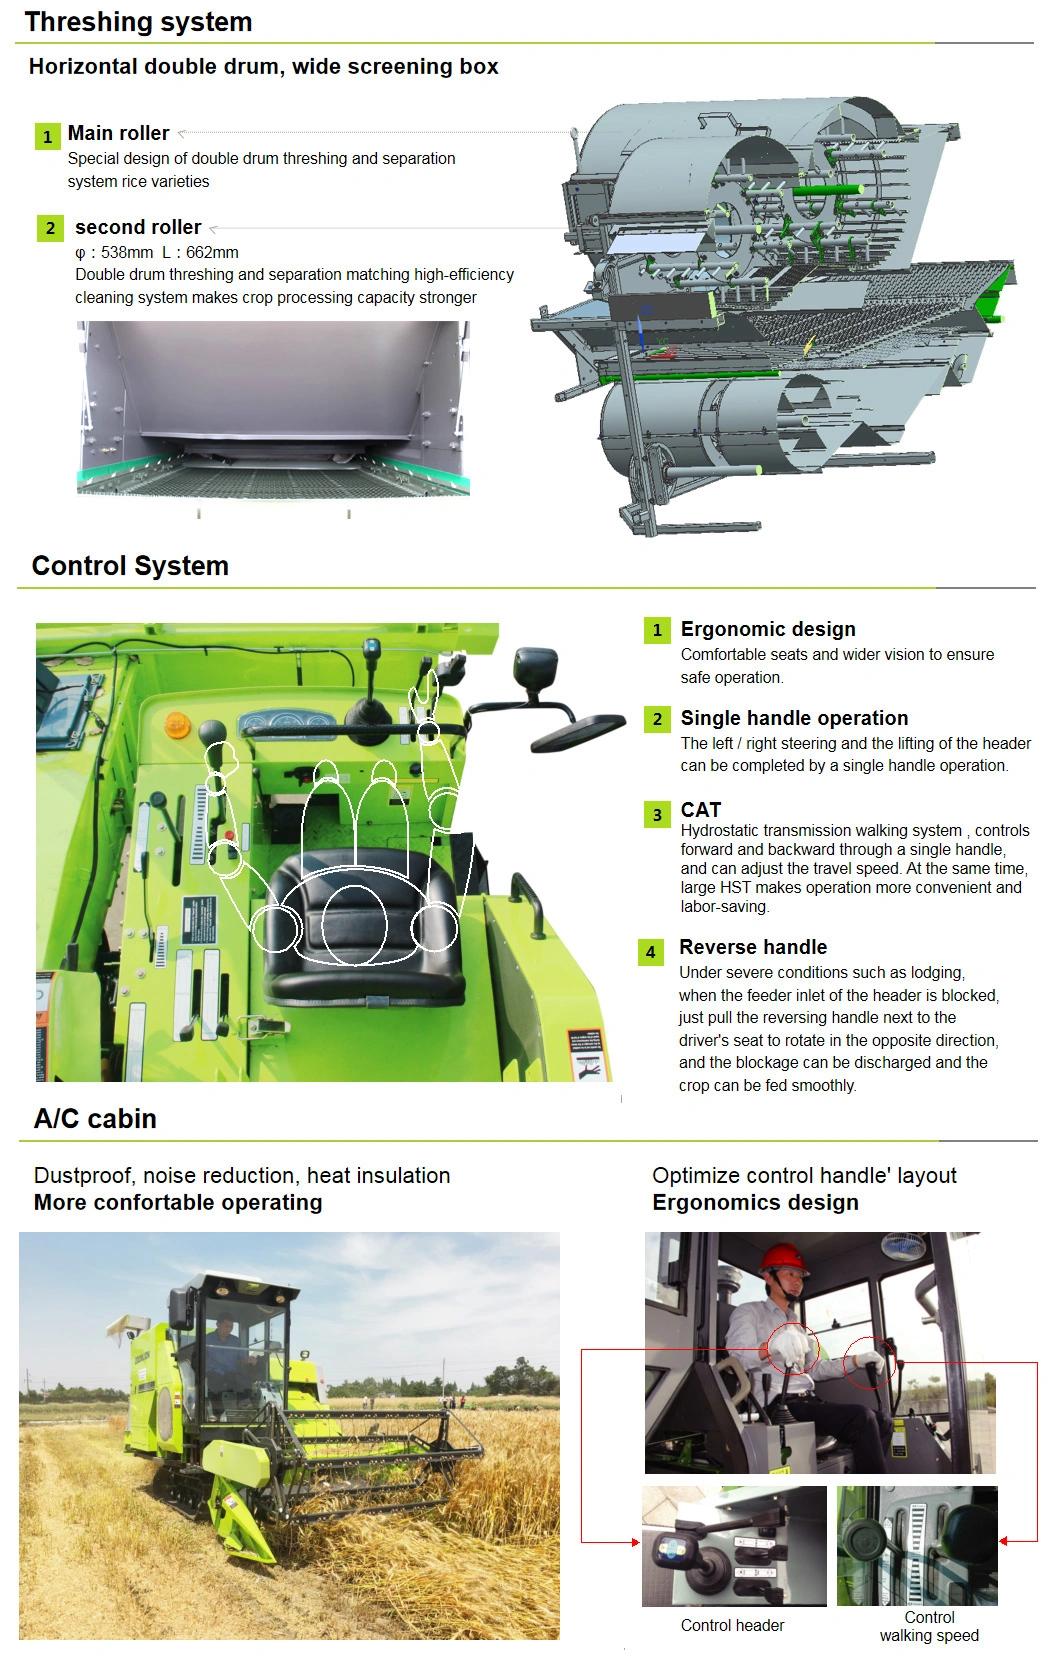 Farm Machinery Zoomlion Rice Combine Harvester Agricultural Machinery